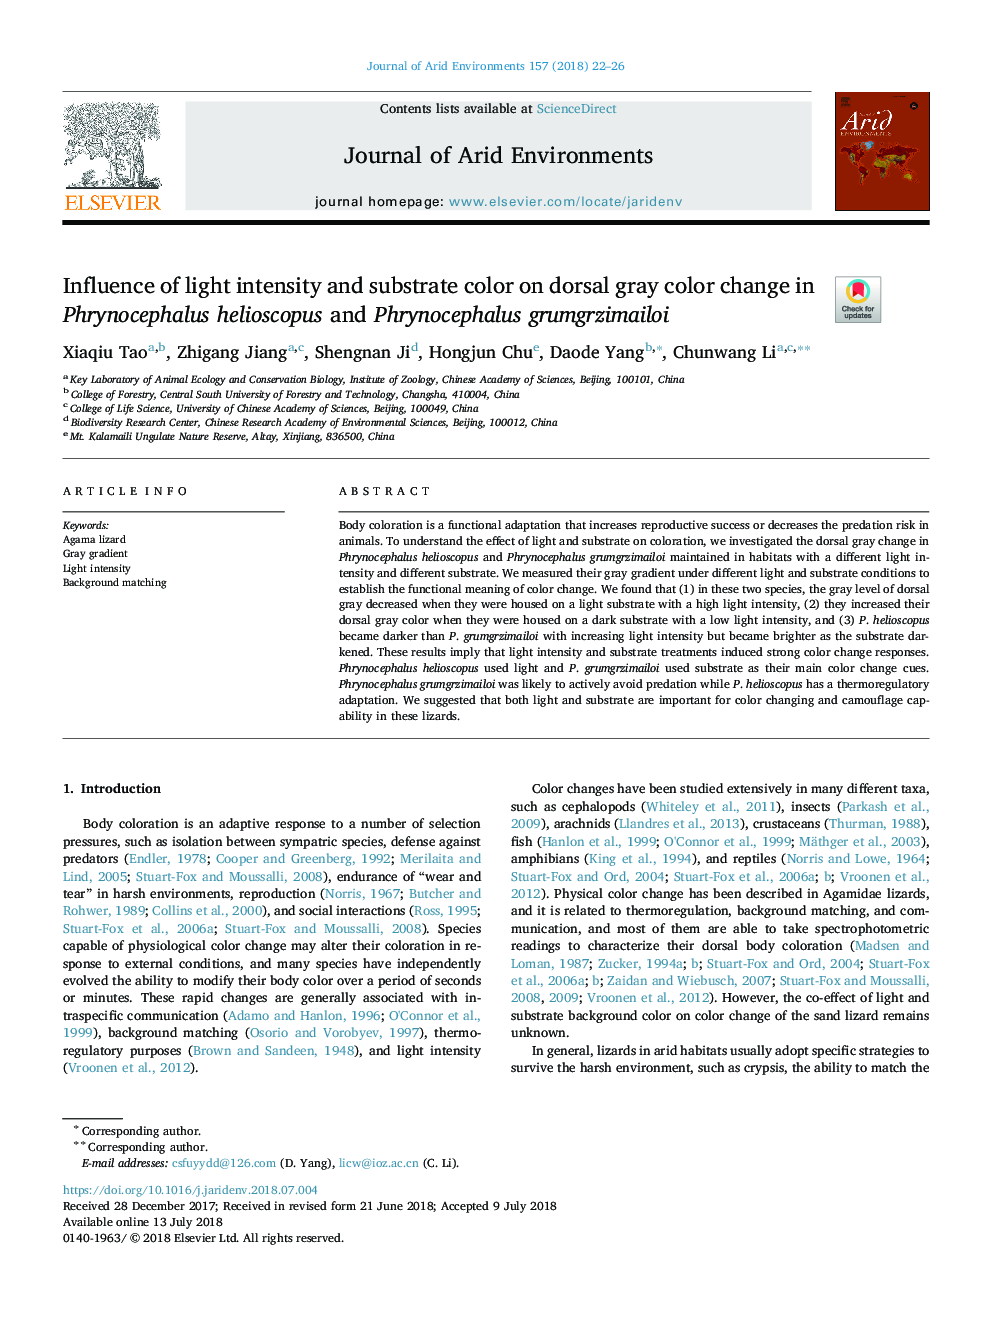 Influence of light intensity and substrate color on dorsal gray color change in Phrynocephalus helioscopus and Phrynocephalus grumgrzimailoi